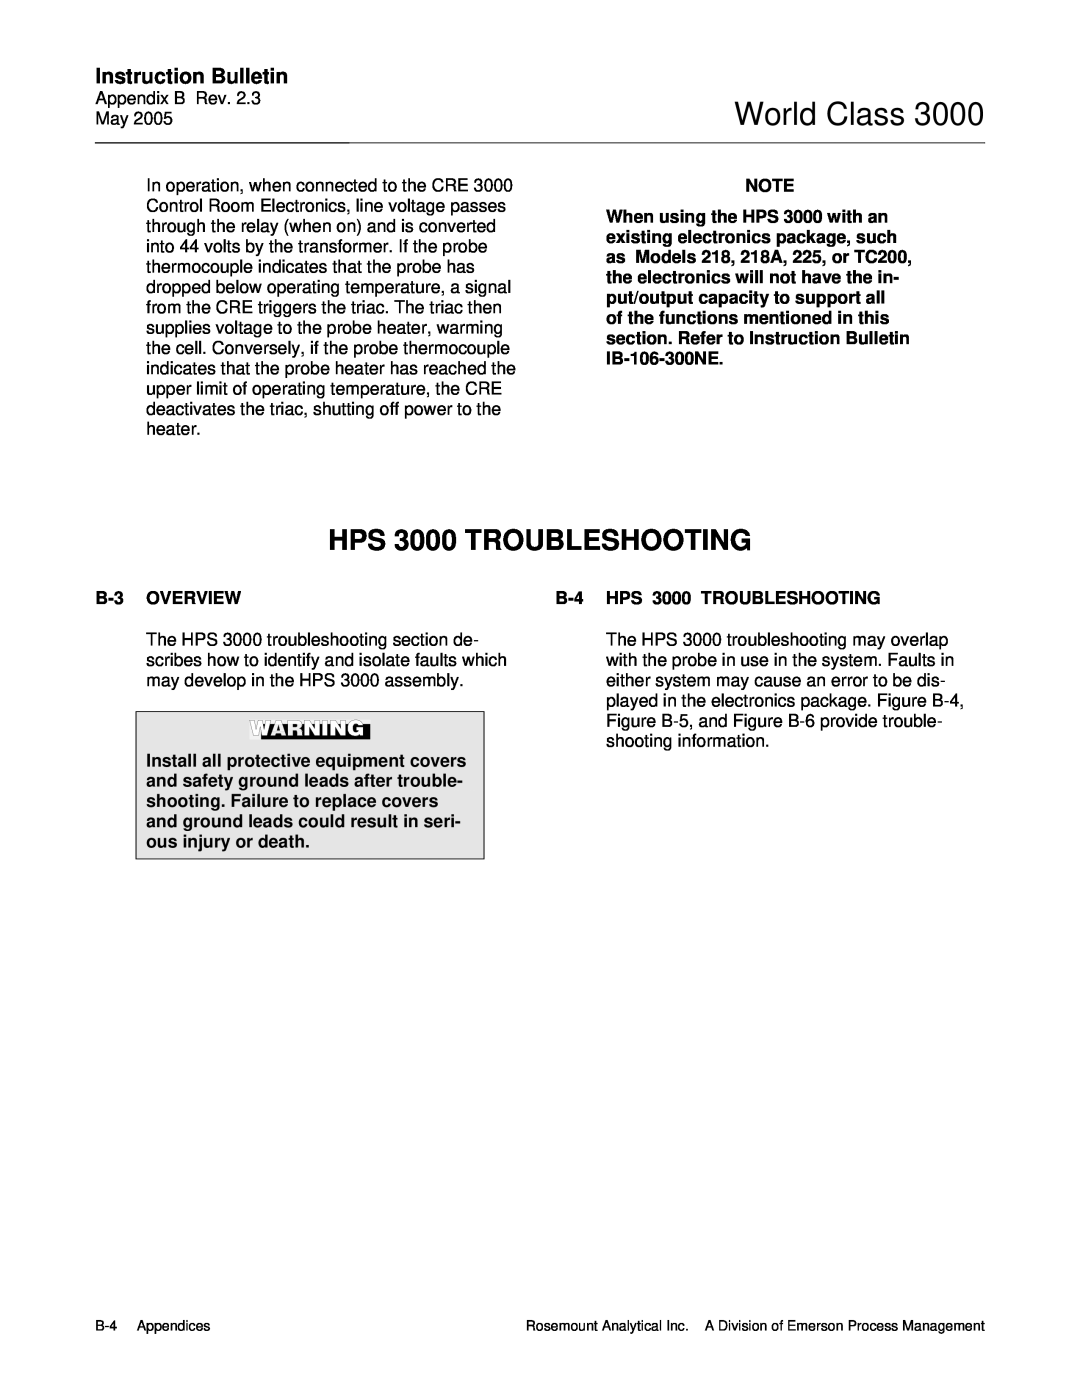 Emerson instruction manual World Class, Instruction Bulletin, B-3OVERVIEW, B-4HPS 3000 TROUBLESHOOTING 